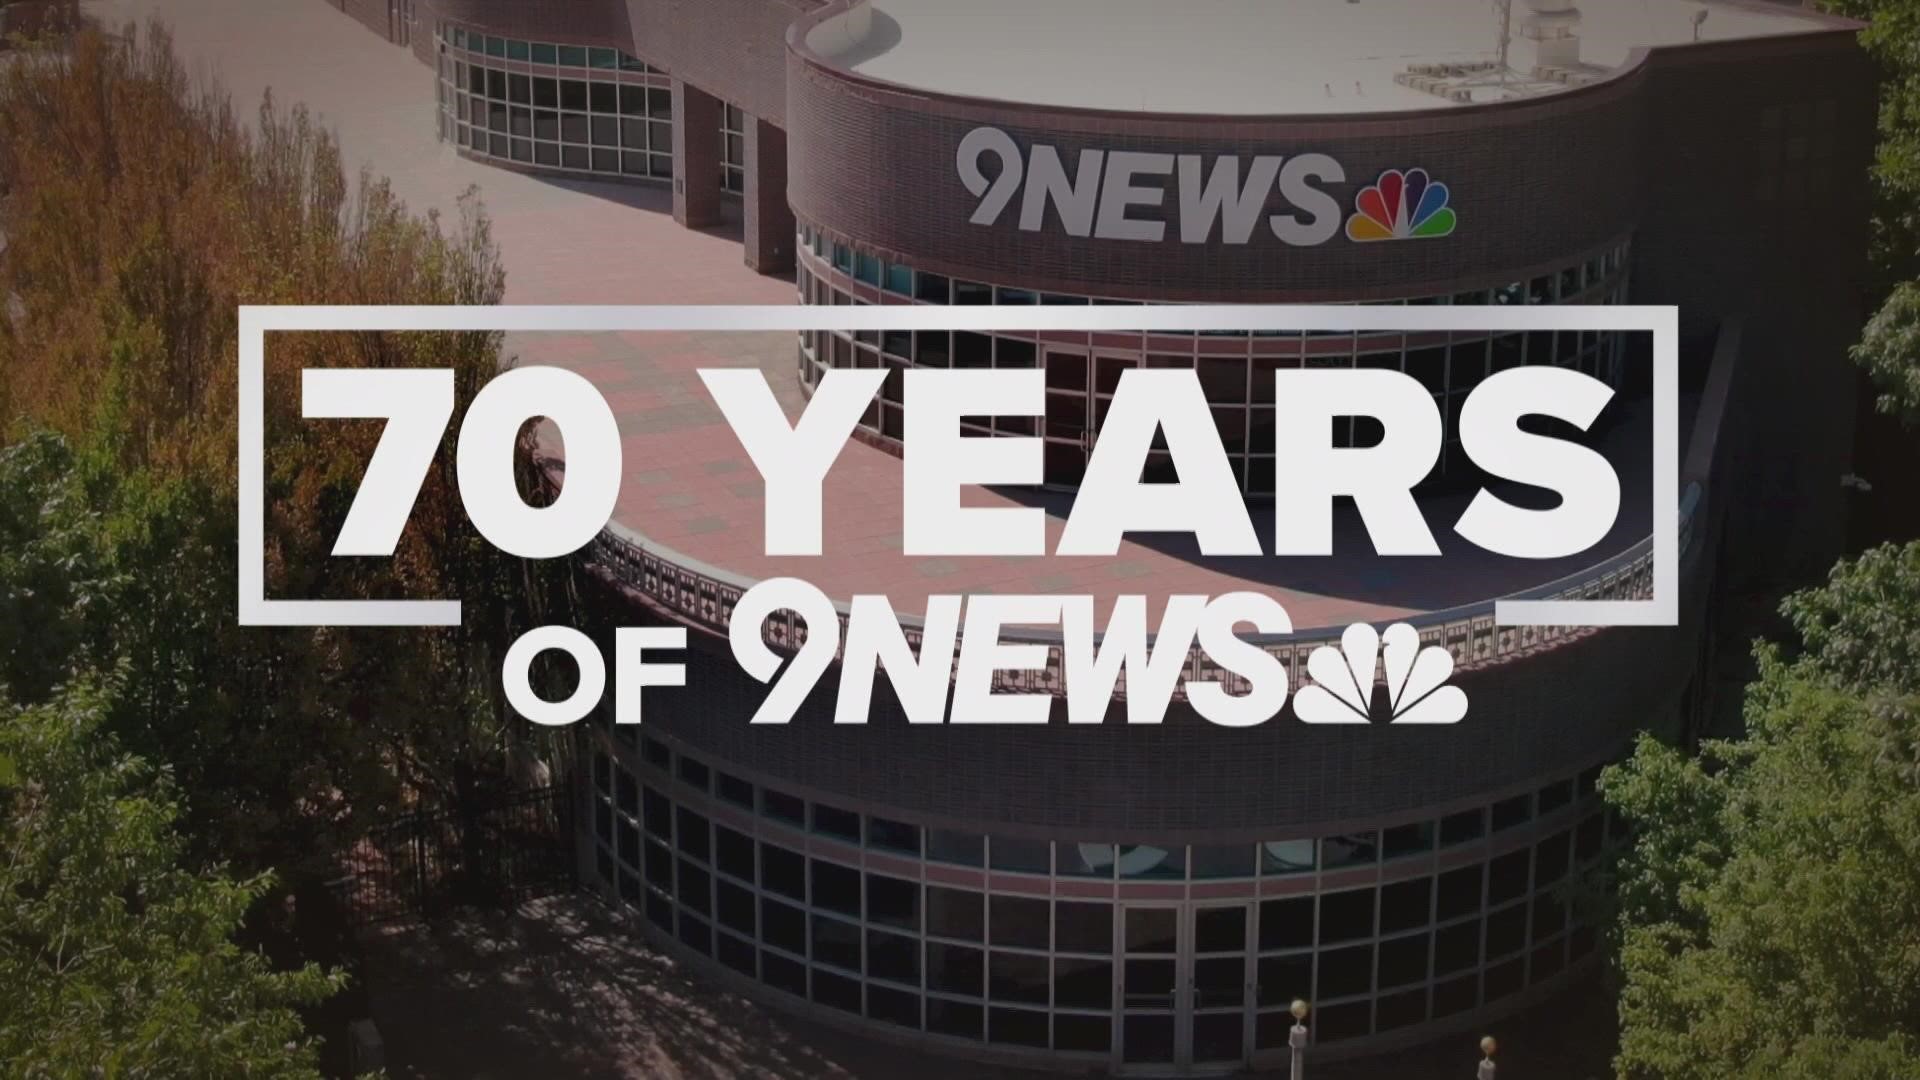 In this special presentation, take a look through the past 70 years of 9NEWS.